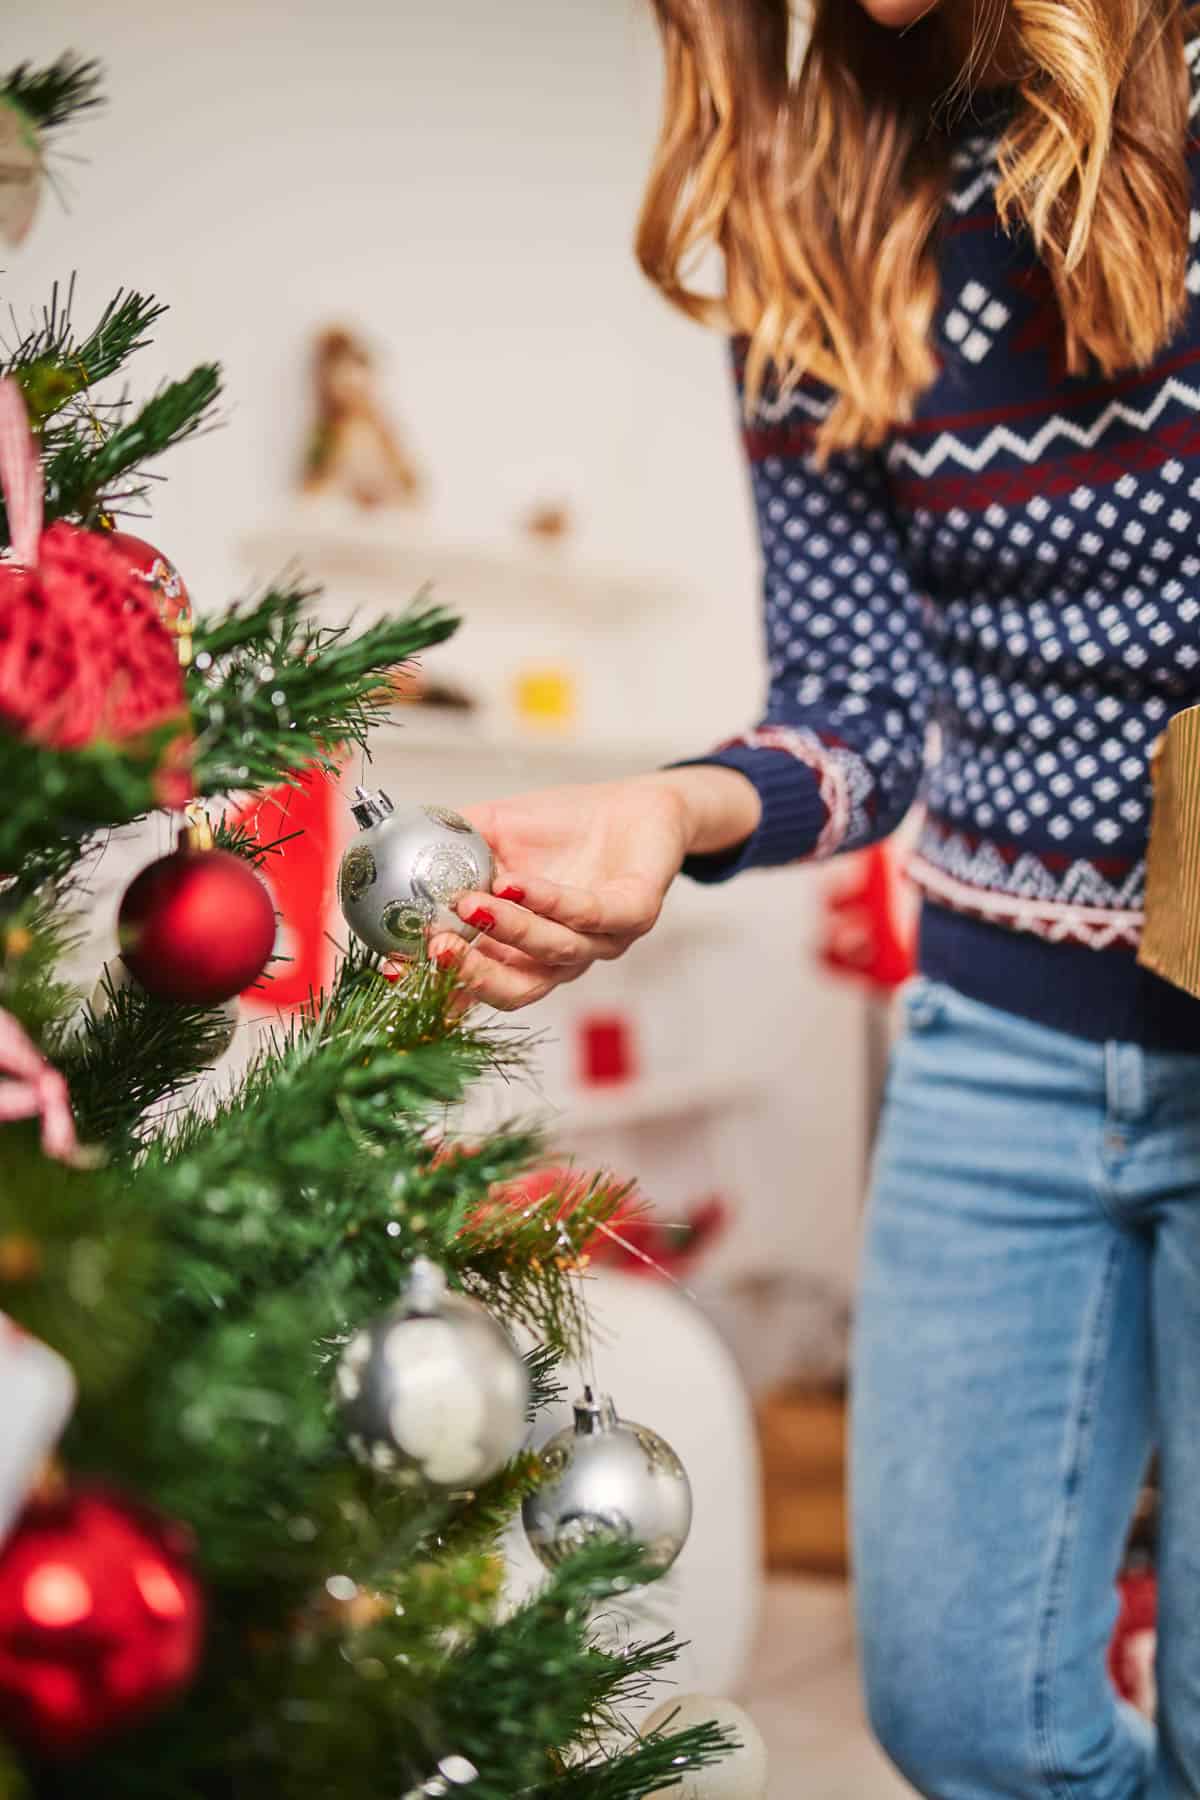 Woman touching an ornament on a Christmas tree.